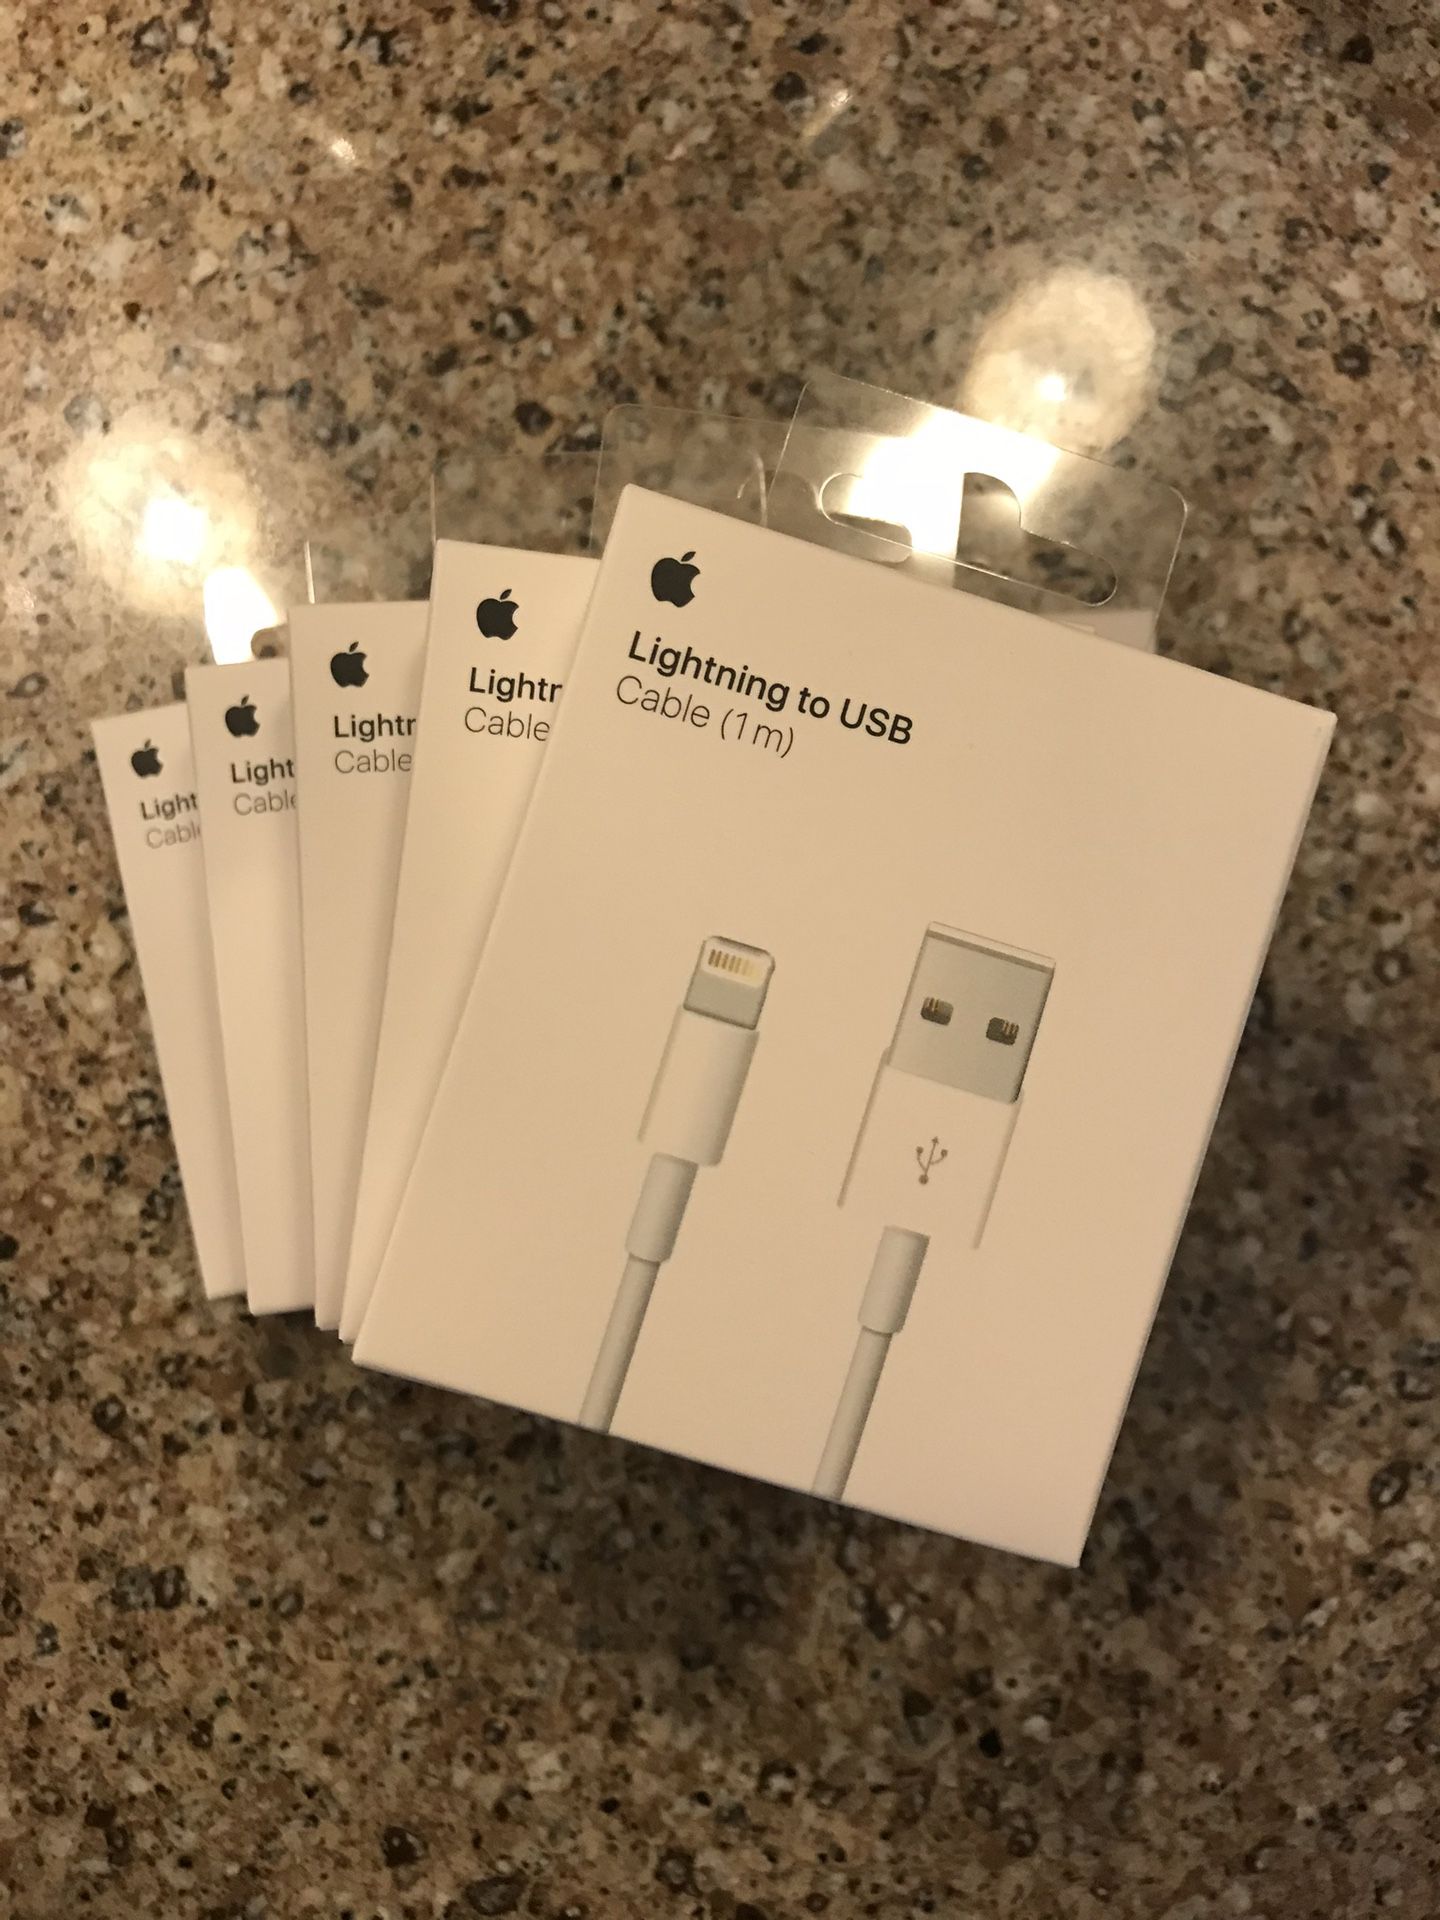 Apple chargers